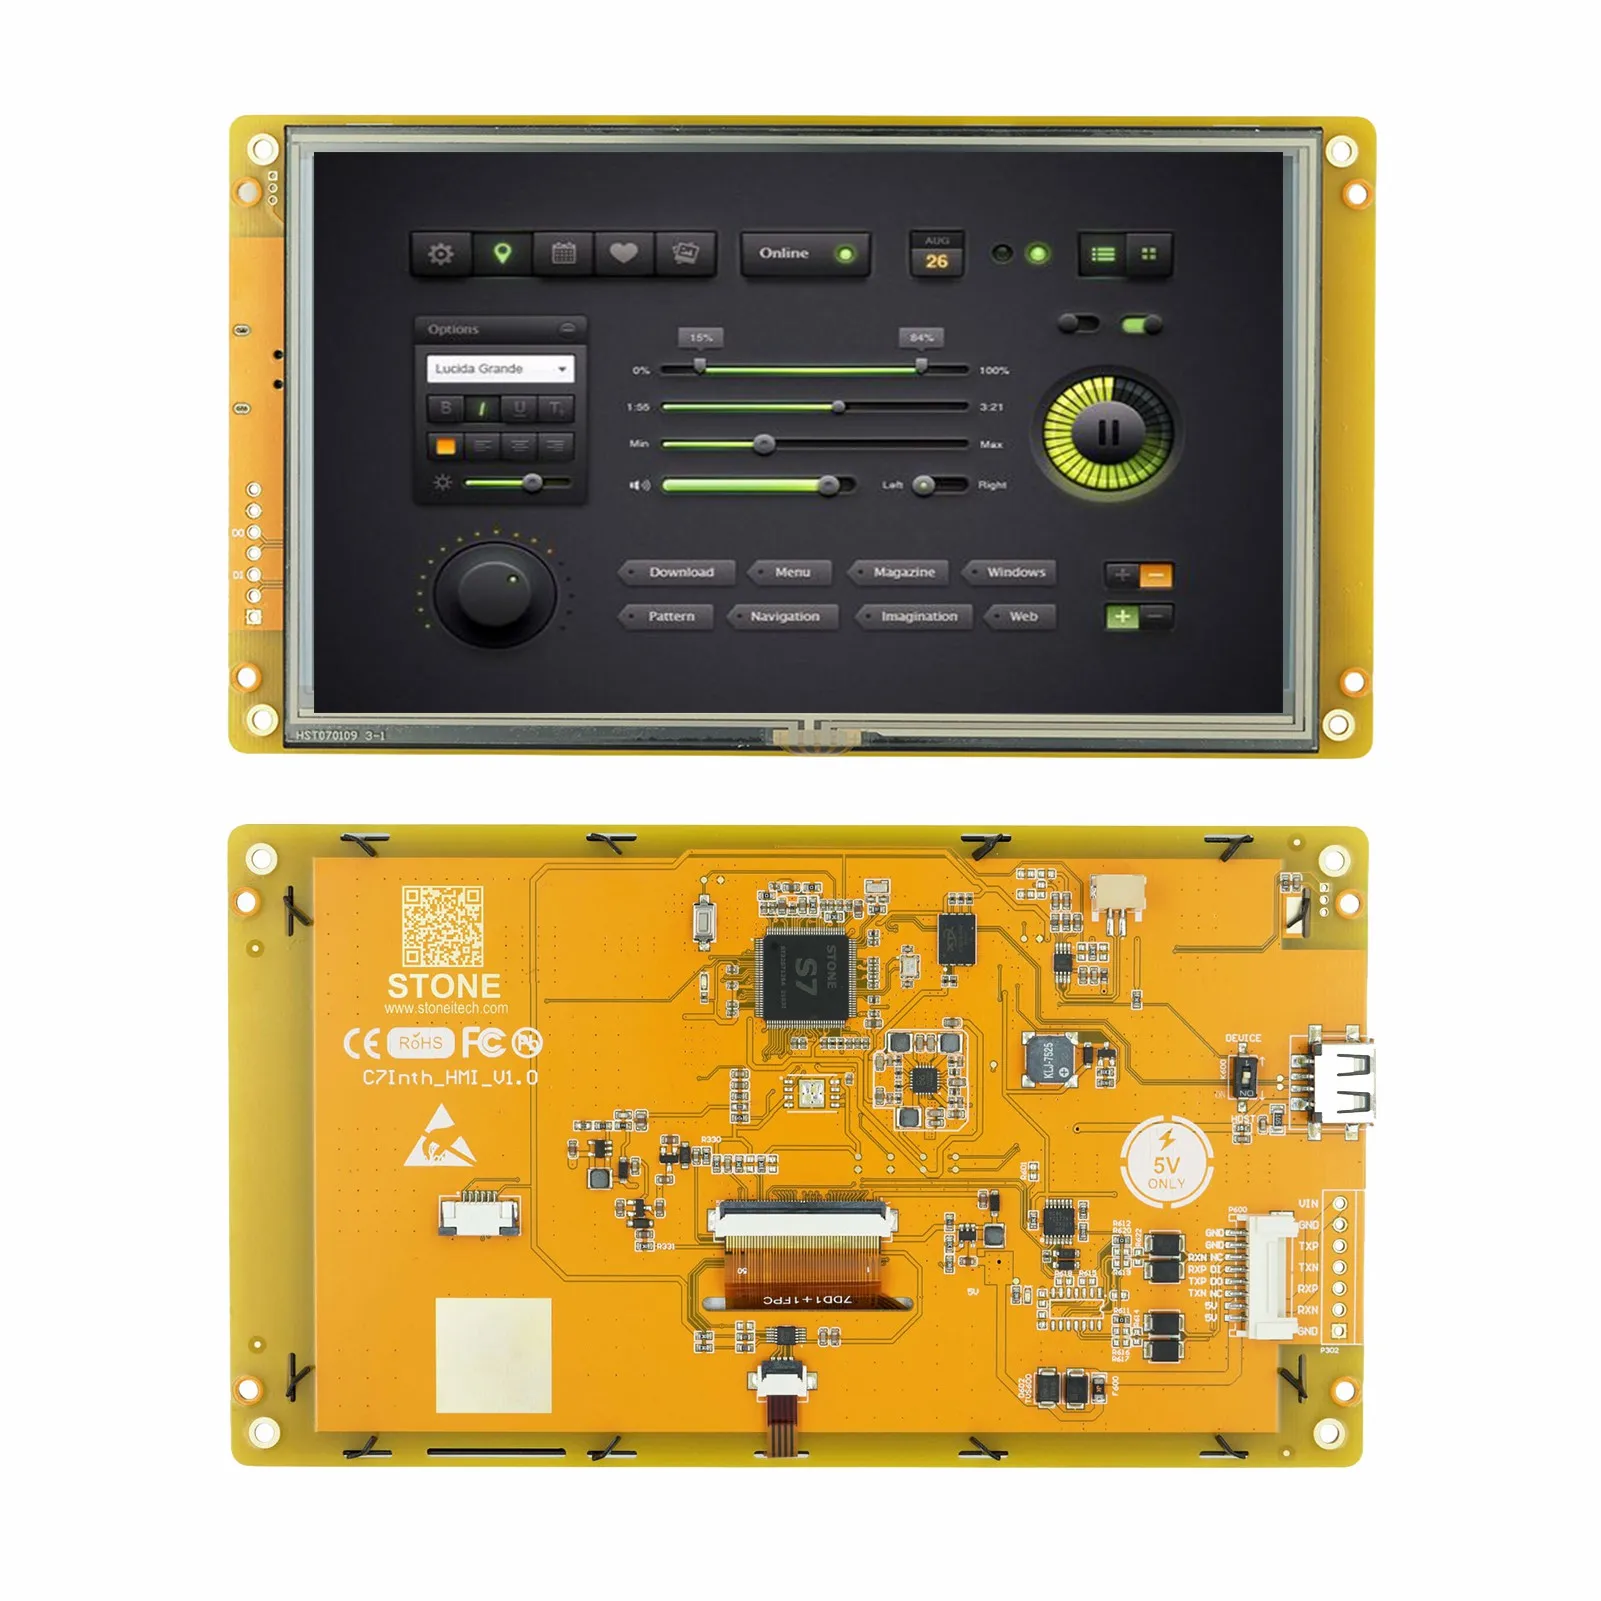 SCBRHMI Touch Screen - Civil Type 7'' HMI Touch Display Built-in RTC wtih RS232/RS485/TTL Applied to IoT